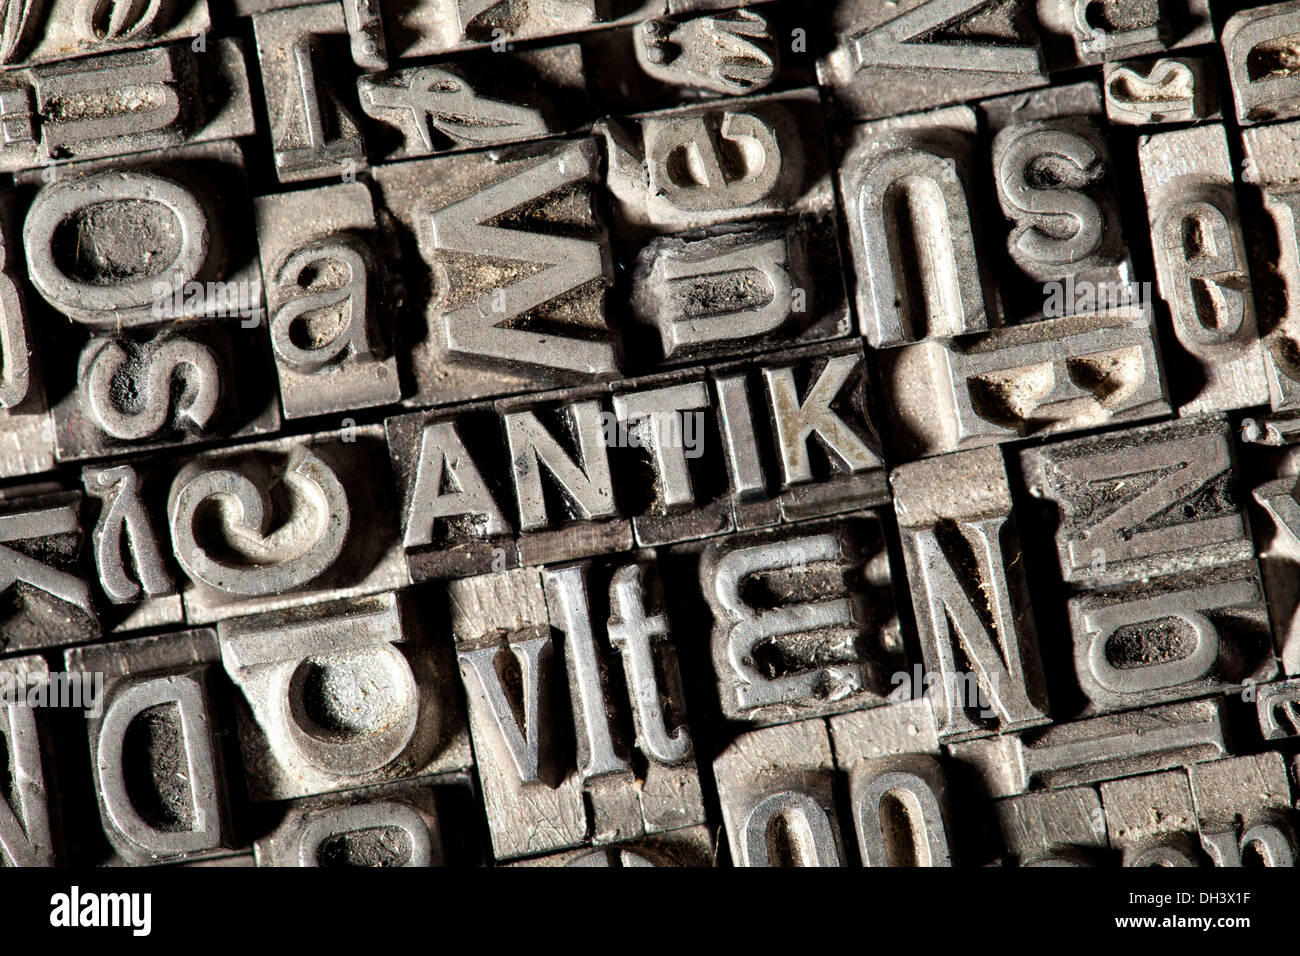 Old lead letters forming the word 'ANTIK', German for 'ANTIQUE' Stock Photo